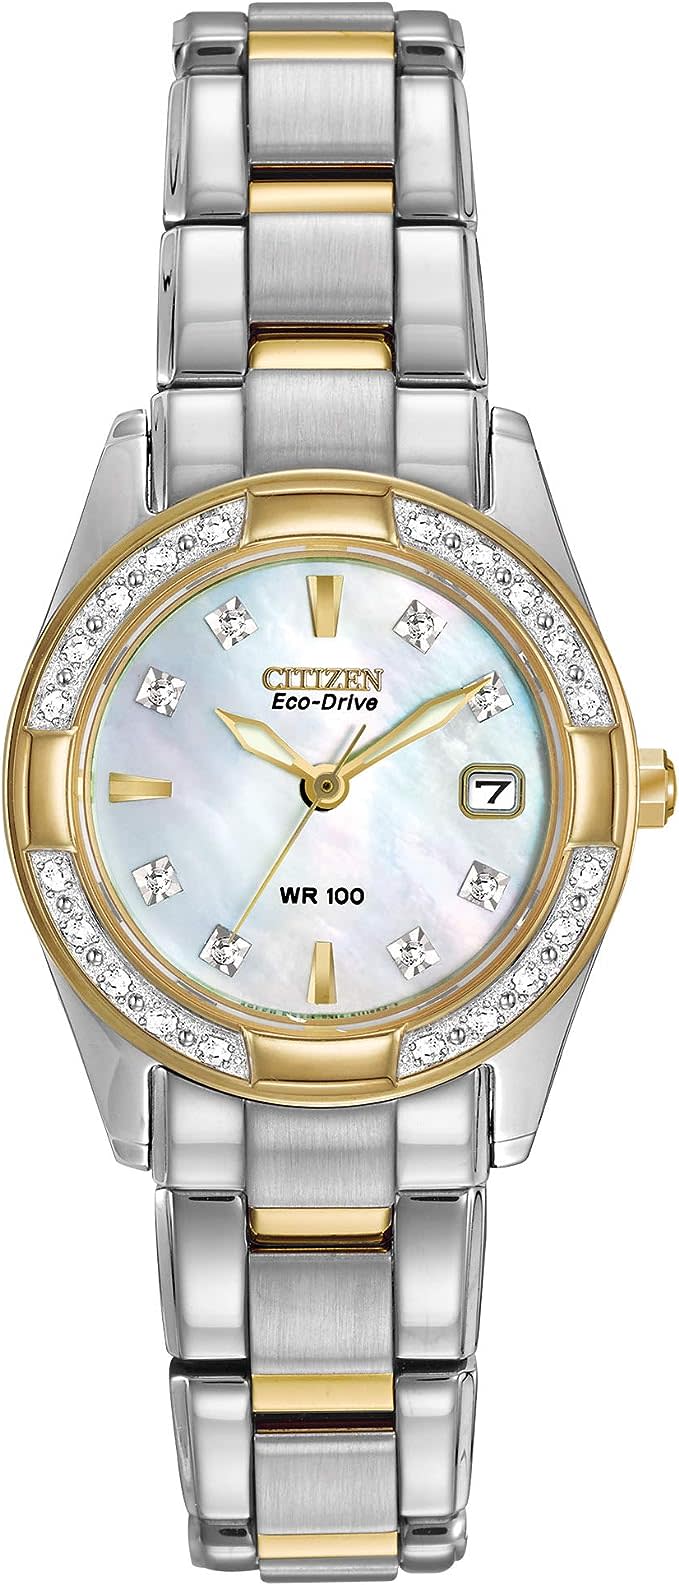 Citizen Women's Eco-Drive Classic Watch in stainless steel.